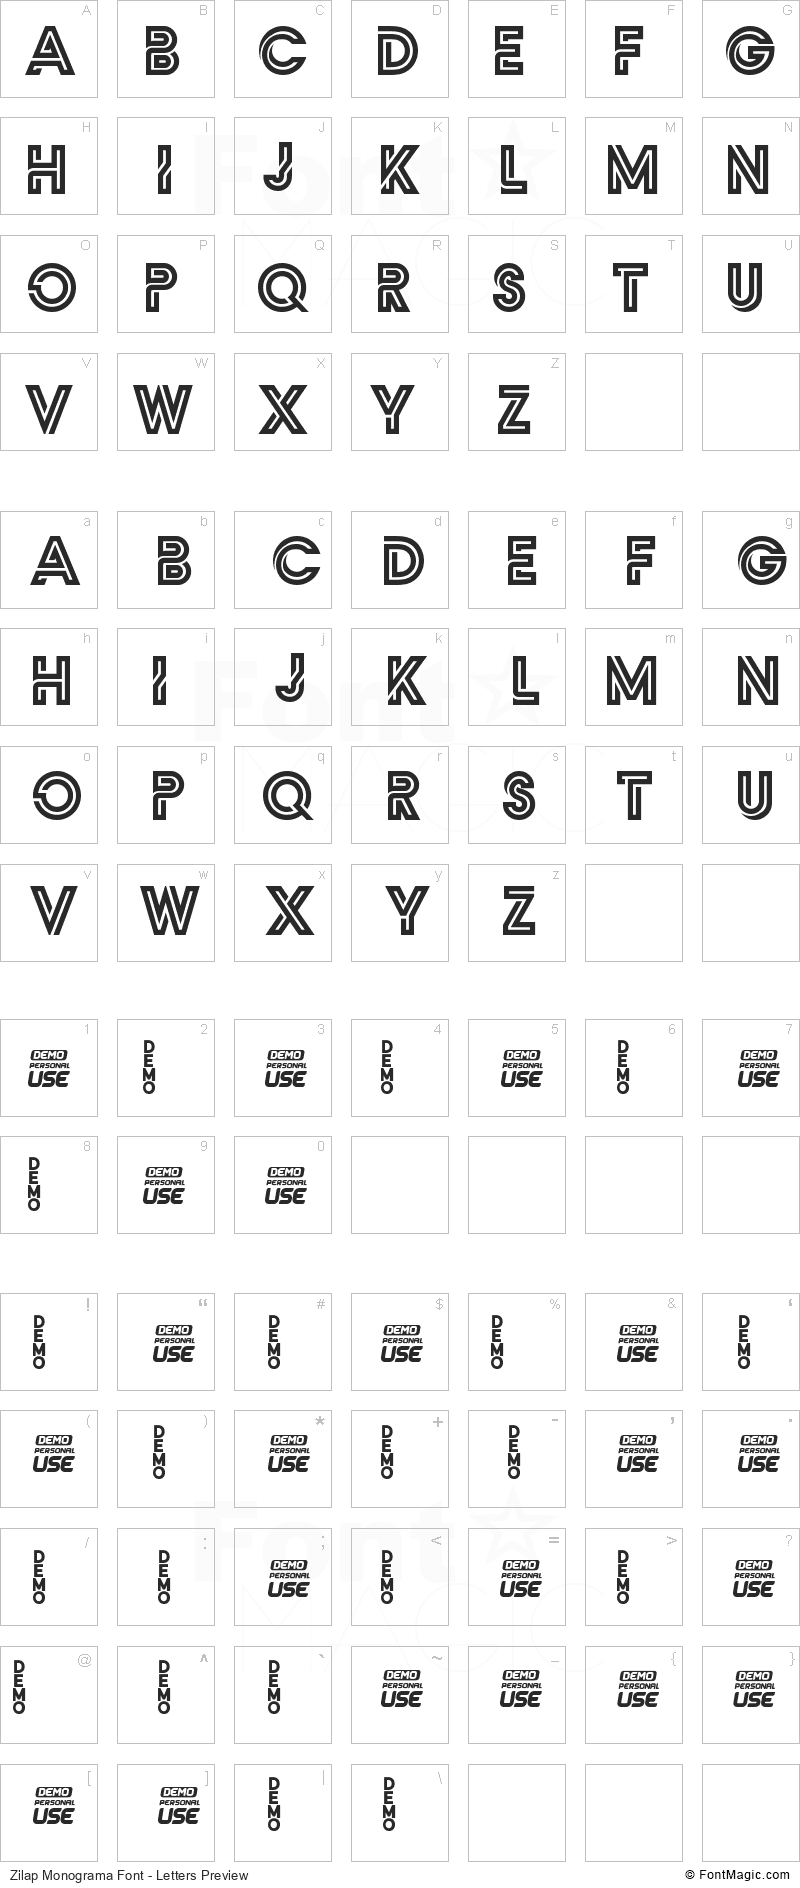 Zilap Monograma Font - All Latters Preview Chart